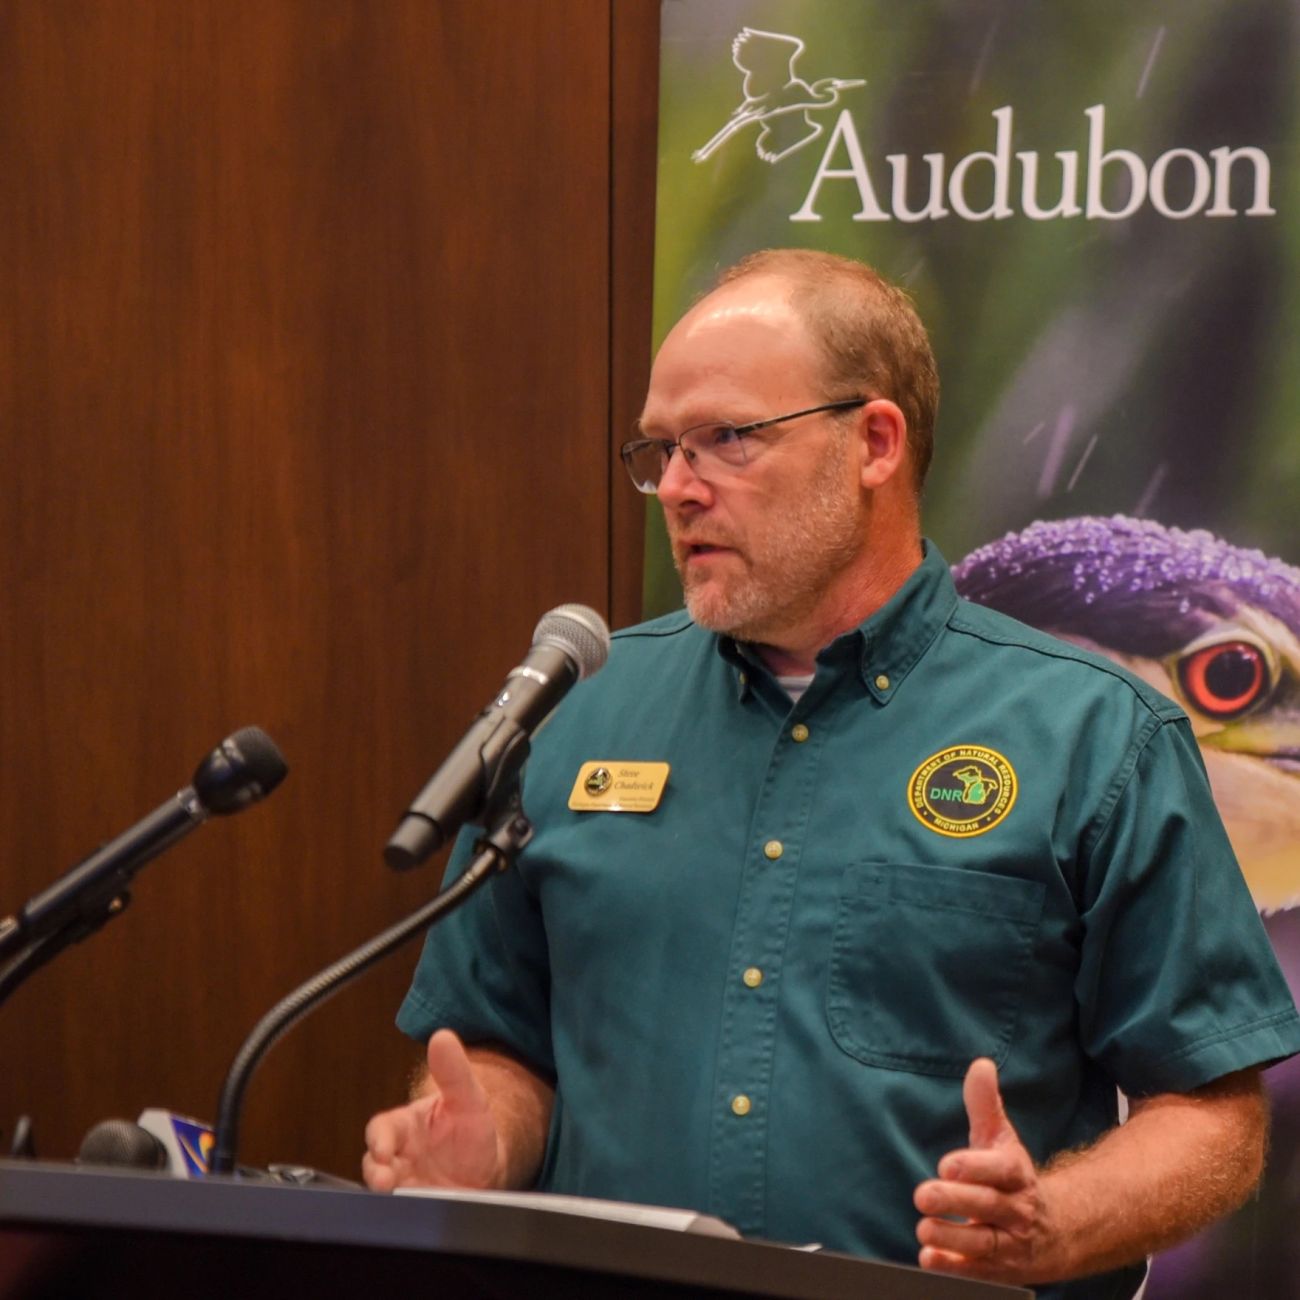 Steve Chadwick wears a green DNR shirt. He is speaking in a microphone. A picture of a bird is in the background